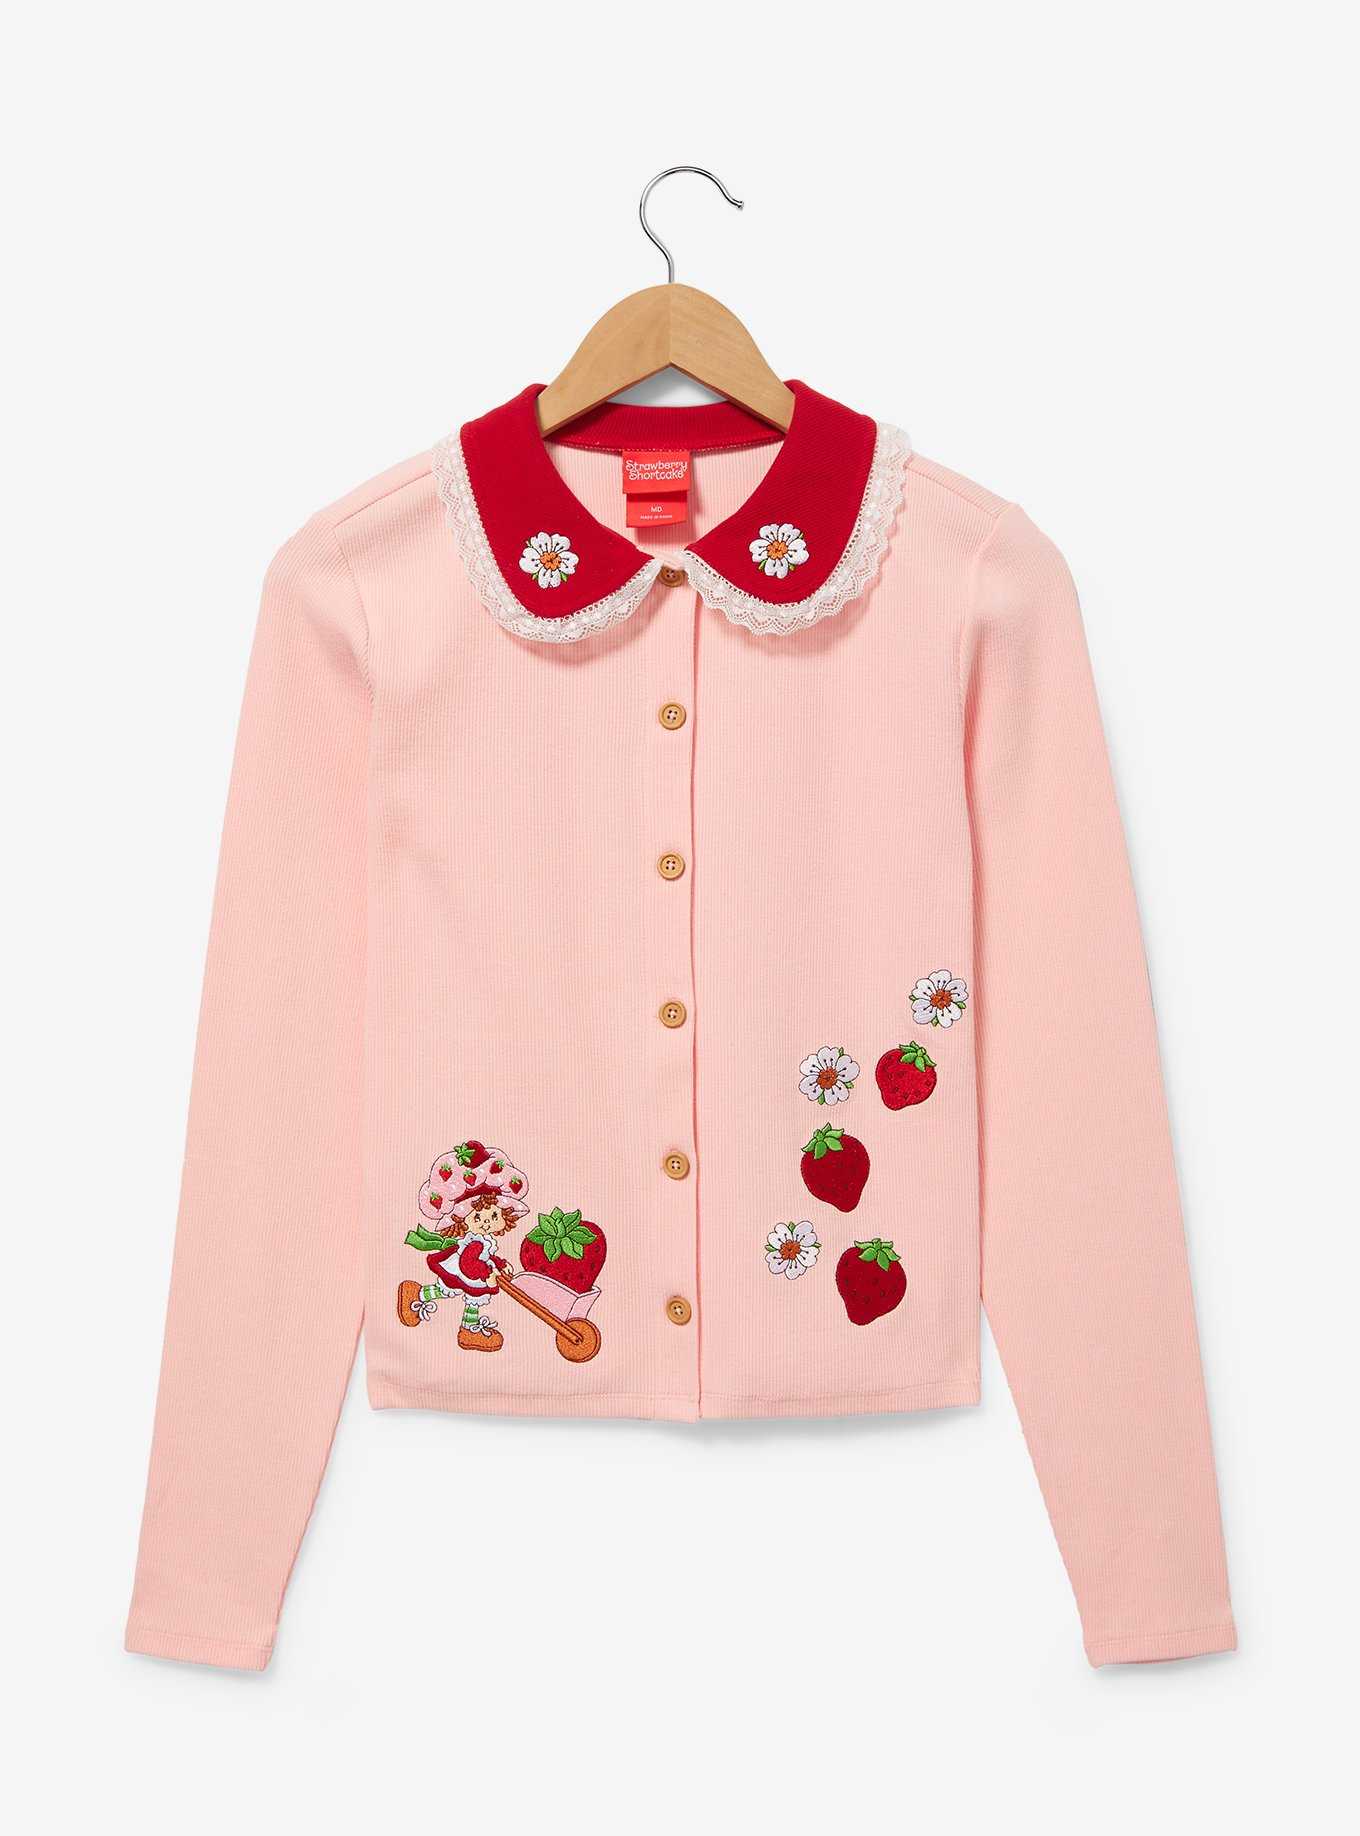 Strawberry Shortcake Portrait Collared Women's Cardigan - BoxLunch Exclusive, , hi-res